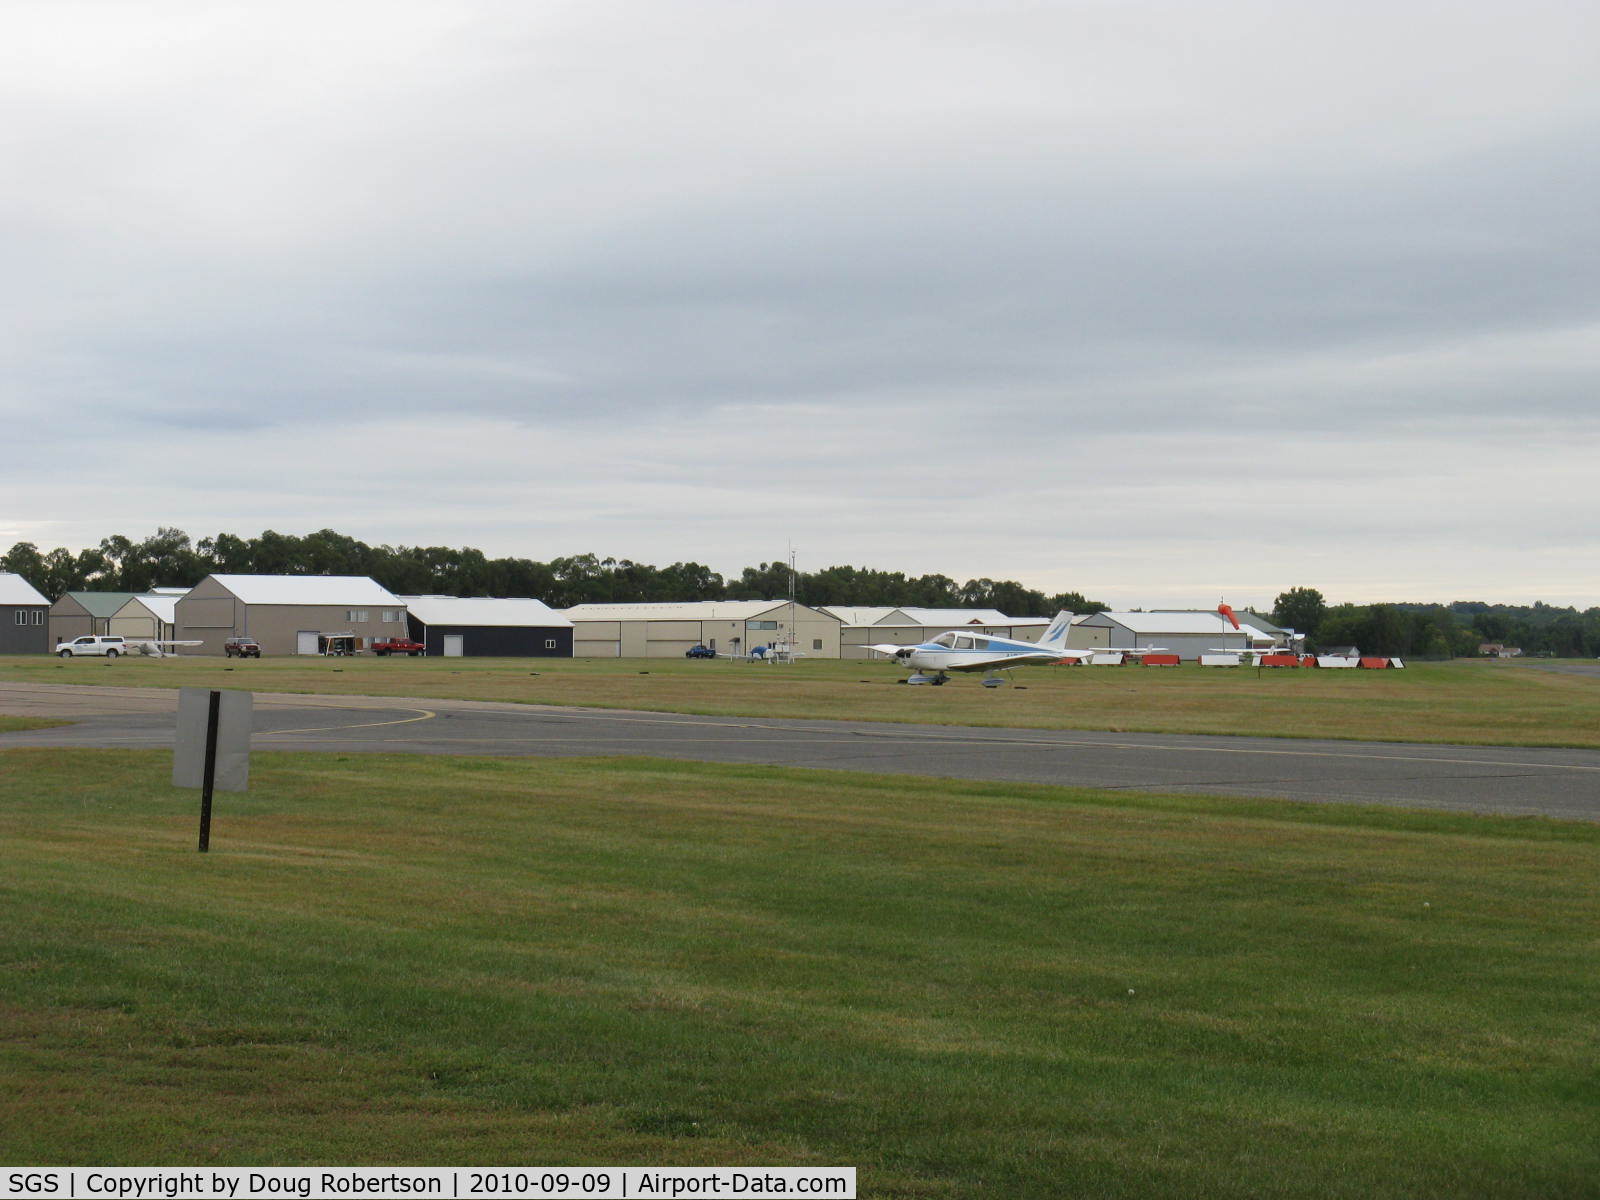 South St Paul Muni-richard E Fleming Fld Airport (SGS) - Aircraft hangars, windsock, taxiway in foreground